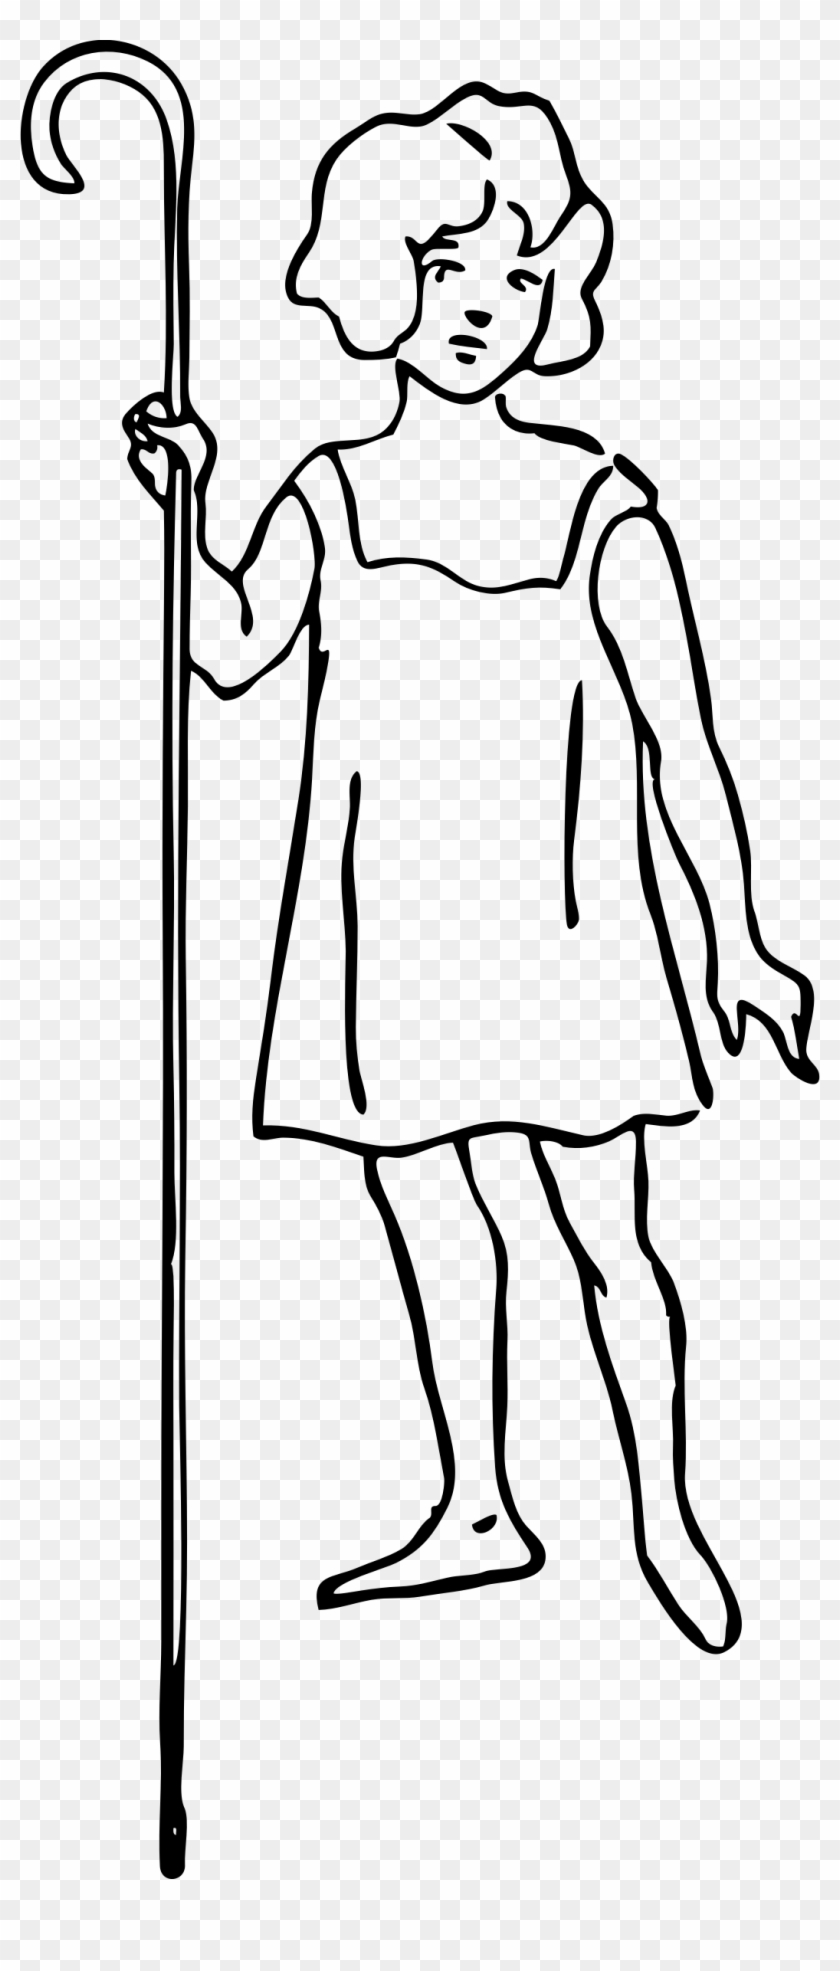 This Free Icons Png Design Of Shepherd Girl - Shepherd Girl Clipart Transparent Png #3986207